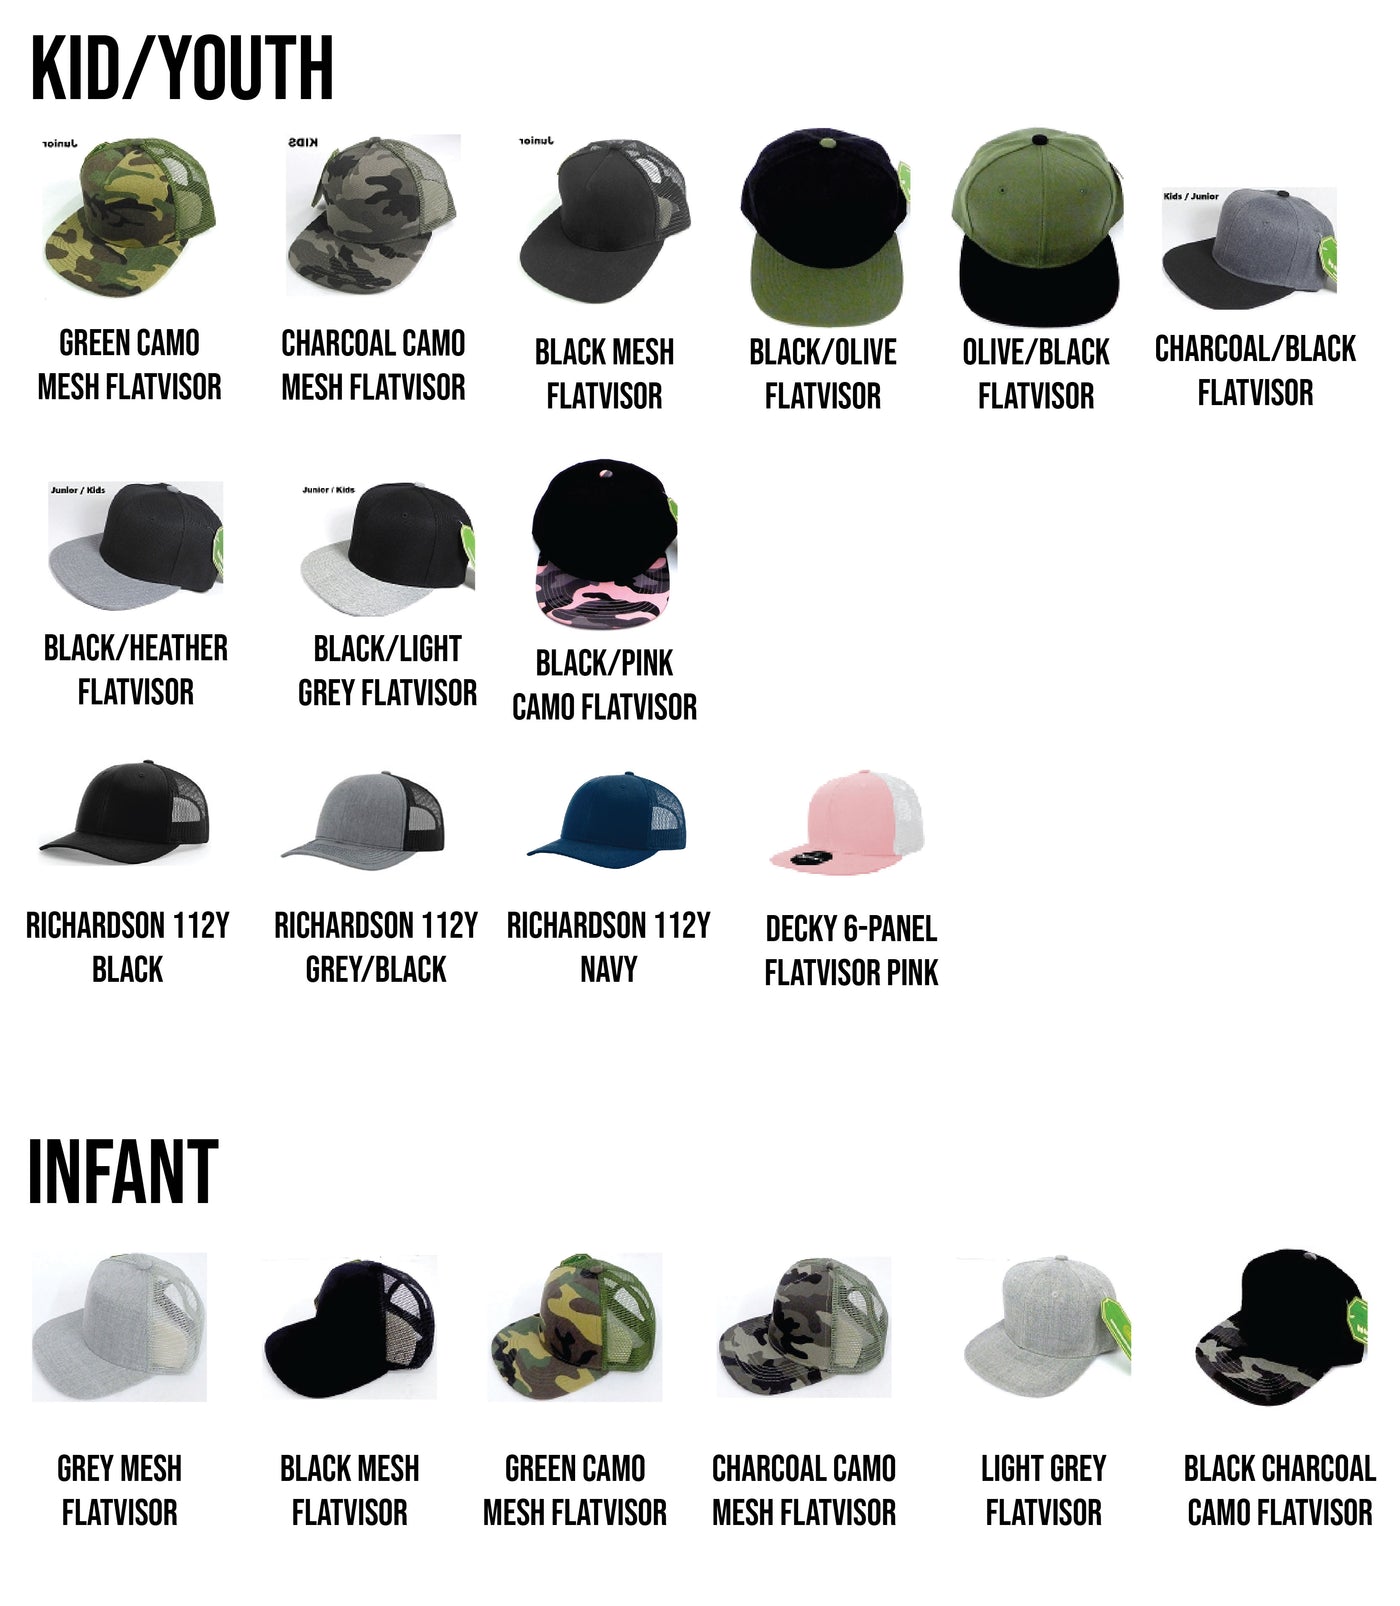 Kids and youth in stock hat options